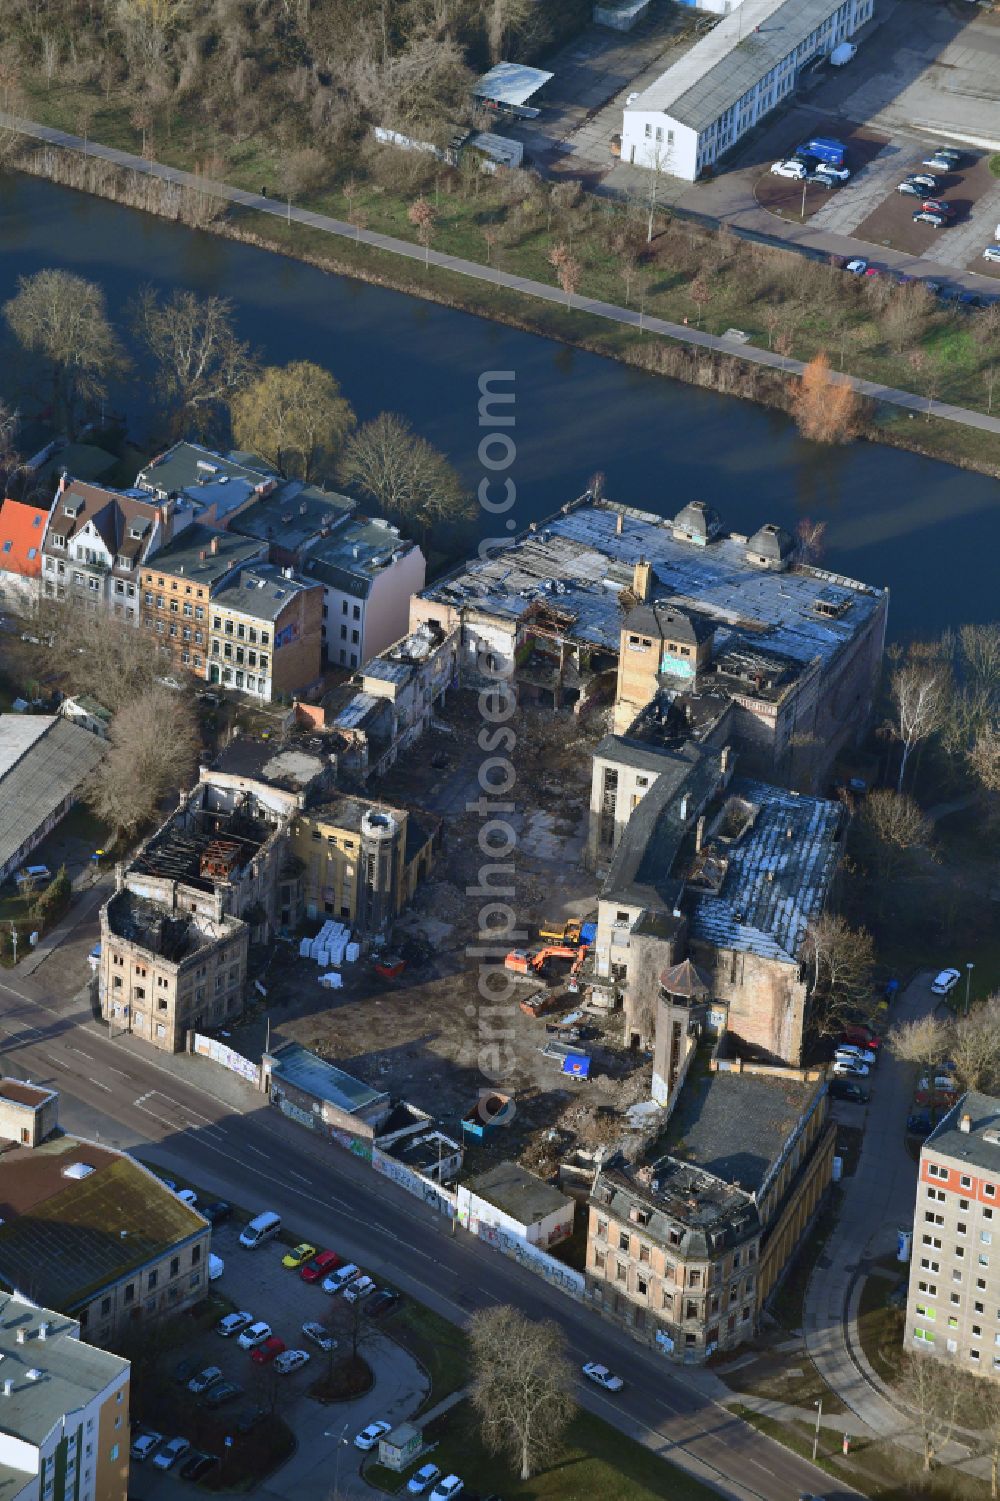 Aerial image Halle (Saale) - Construction site to build a new multi-family residential complex Freyberg Brauerei on street Glauchaer Strasse - Weingaerten in the district Suedliche Innenstadt in Halle (Saale) in the state Saxony-Anhalt, Germany